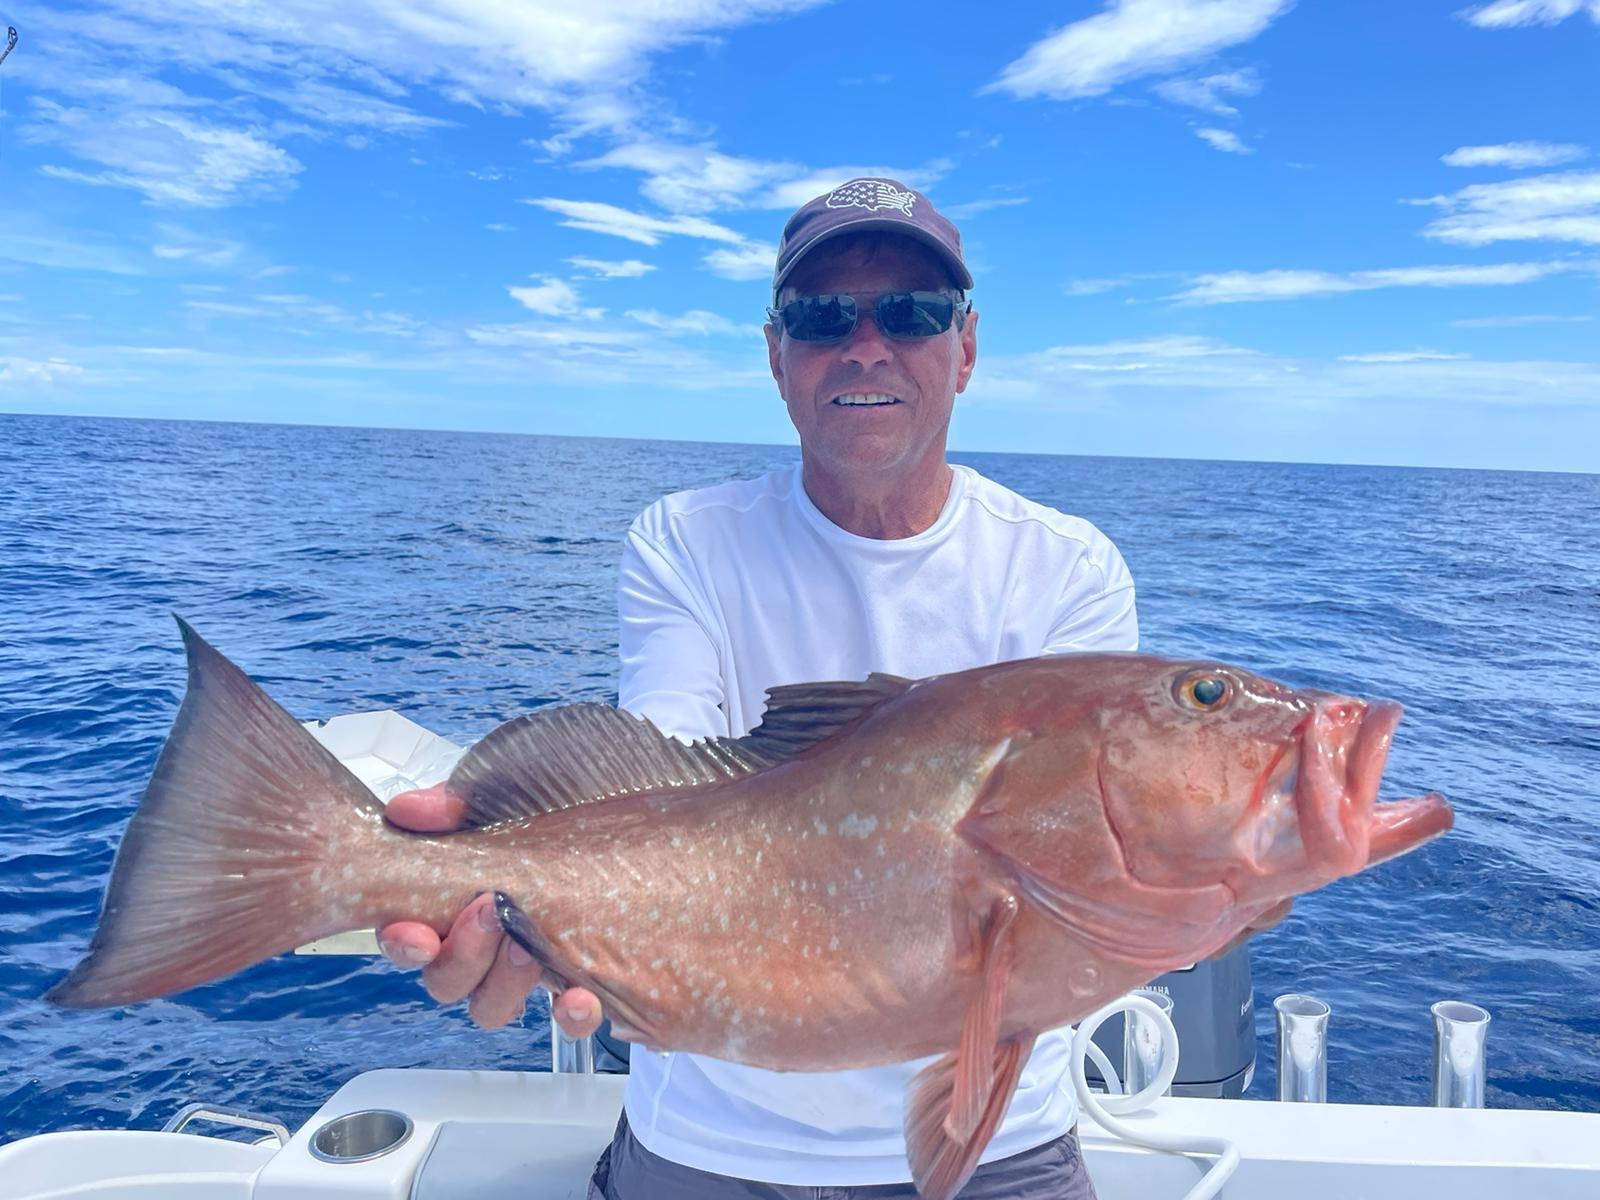 Grouper Fishing in Florida: How to Catch Groupers